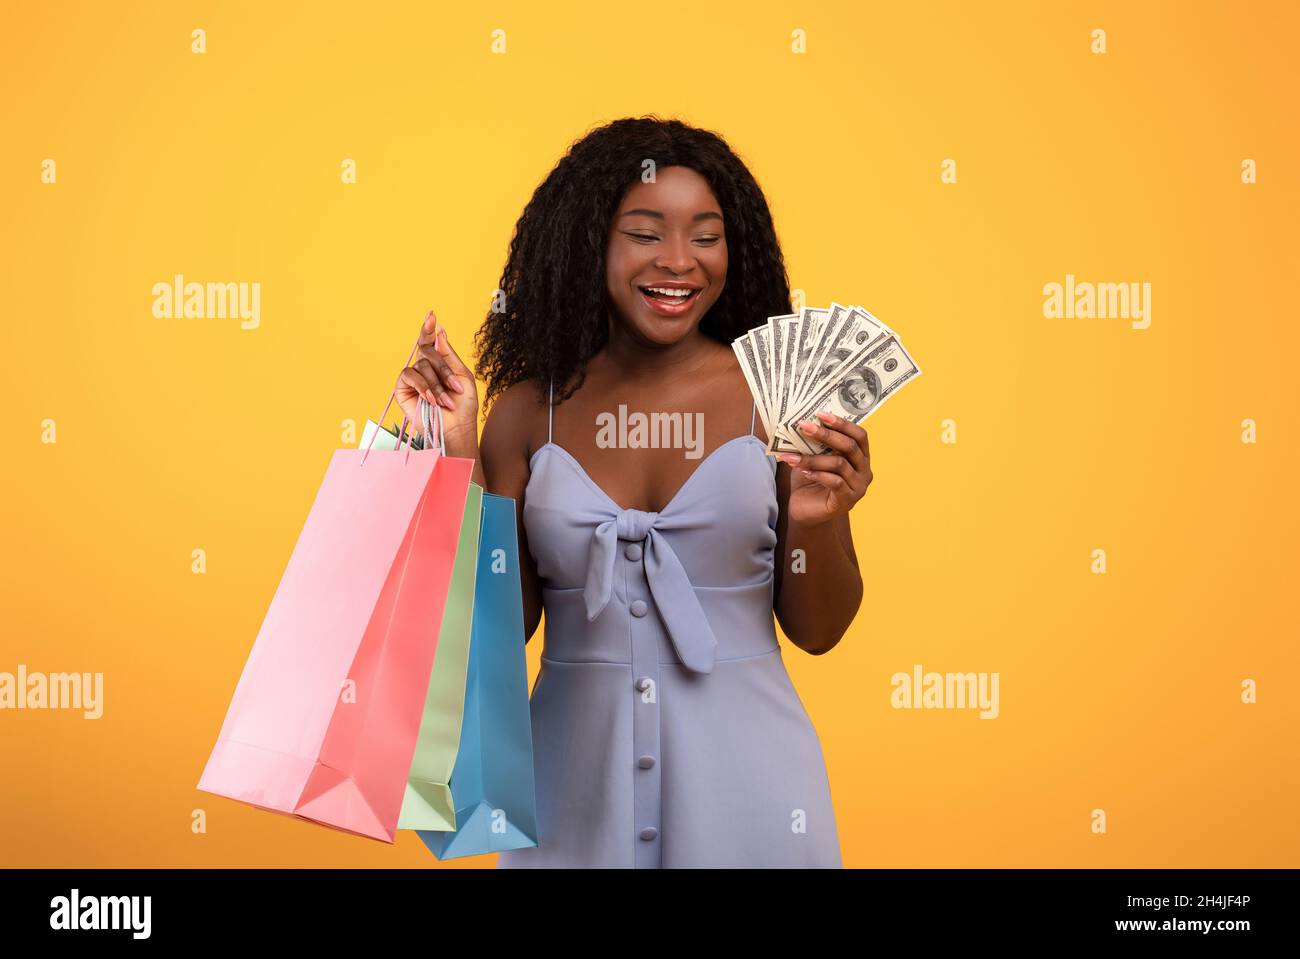 Shopping budget. Portrait of young black woman holding fan of money and colorful shopper bags over orange background Stock Photo